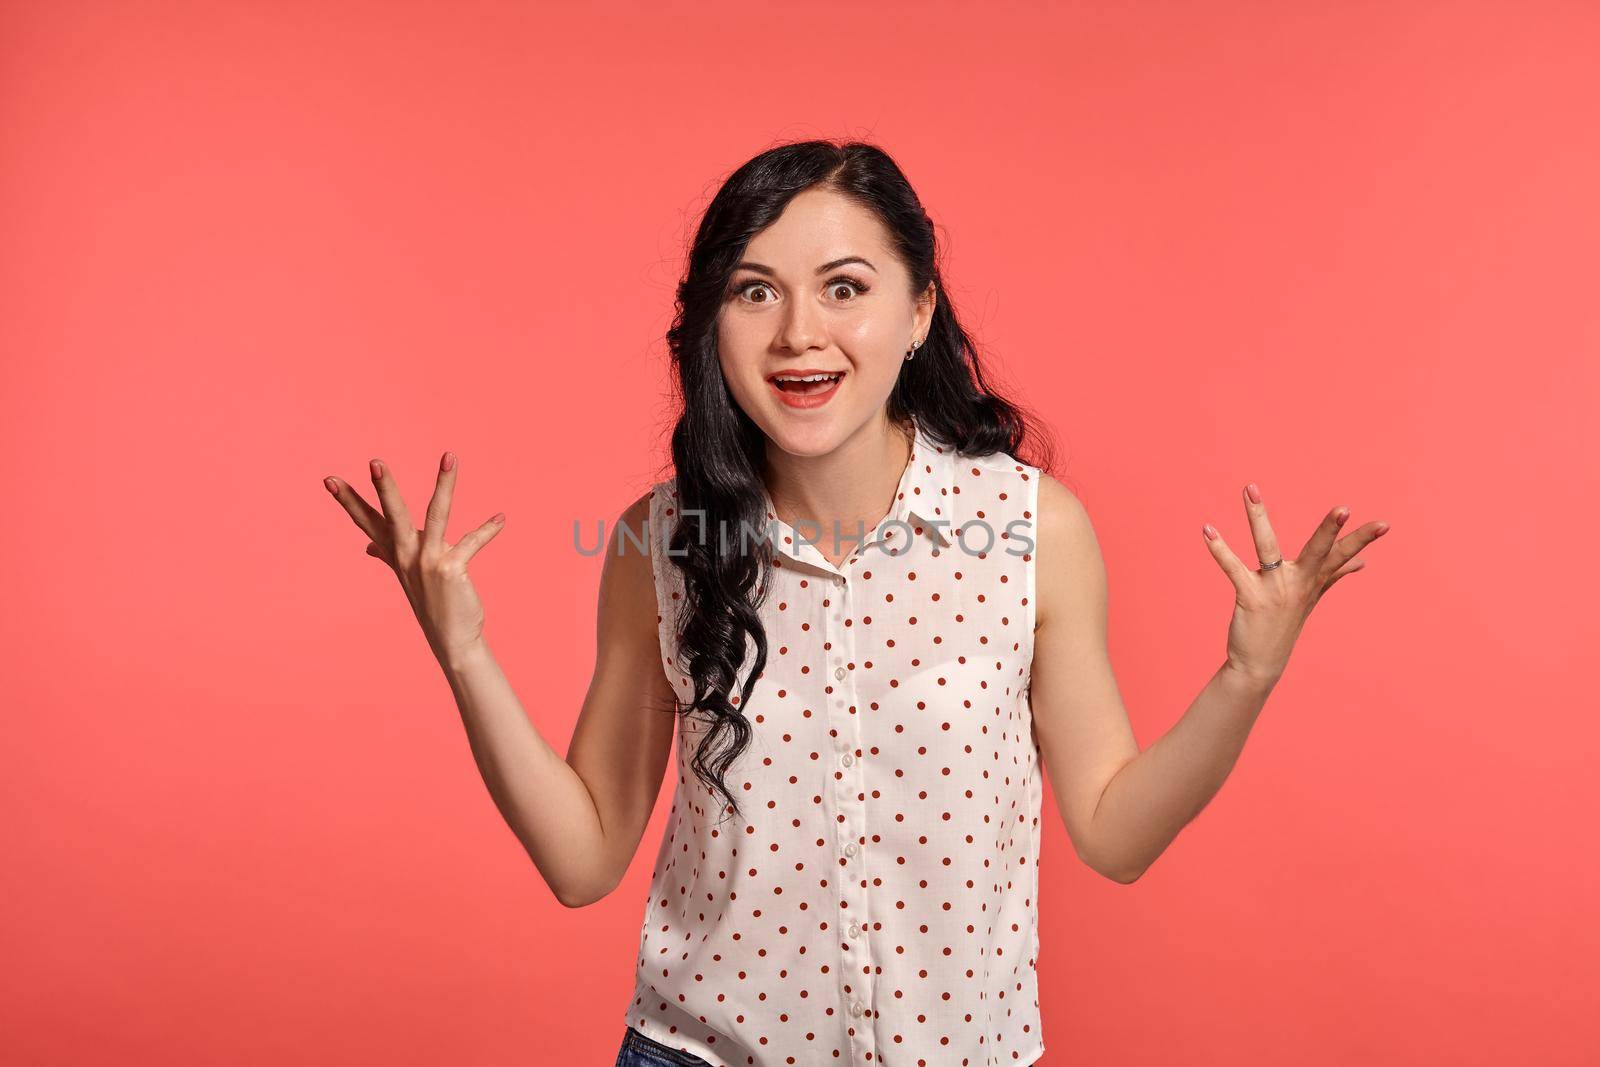 Studio shot of an elegant girl teenager looking surprised, wearing casual white polka dot blouse. Little brunette female feeling happy, posing over a pink background. People and sincere emotions.